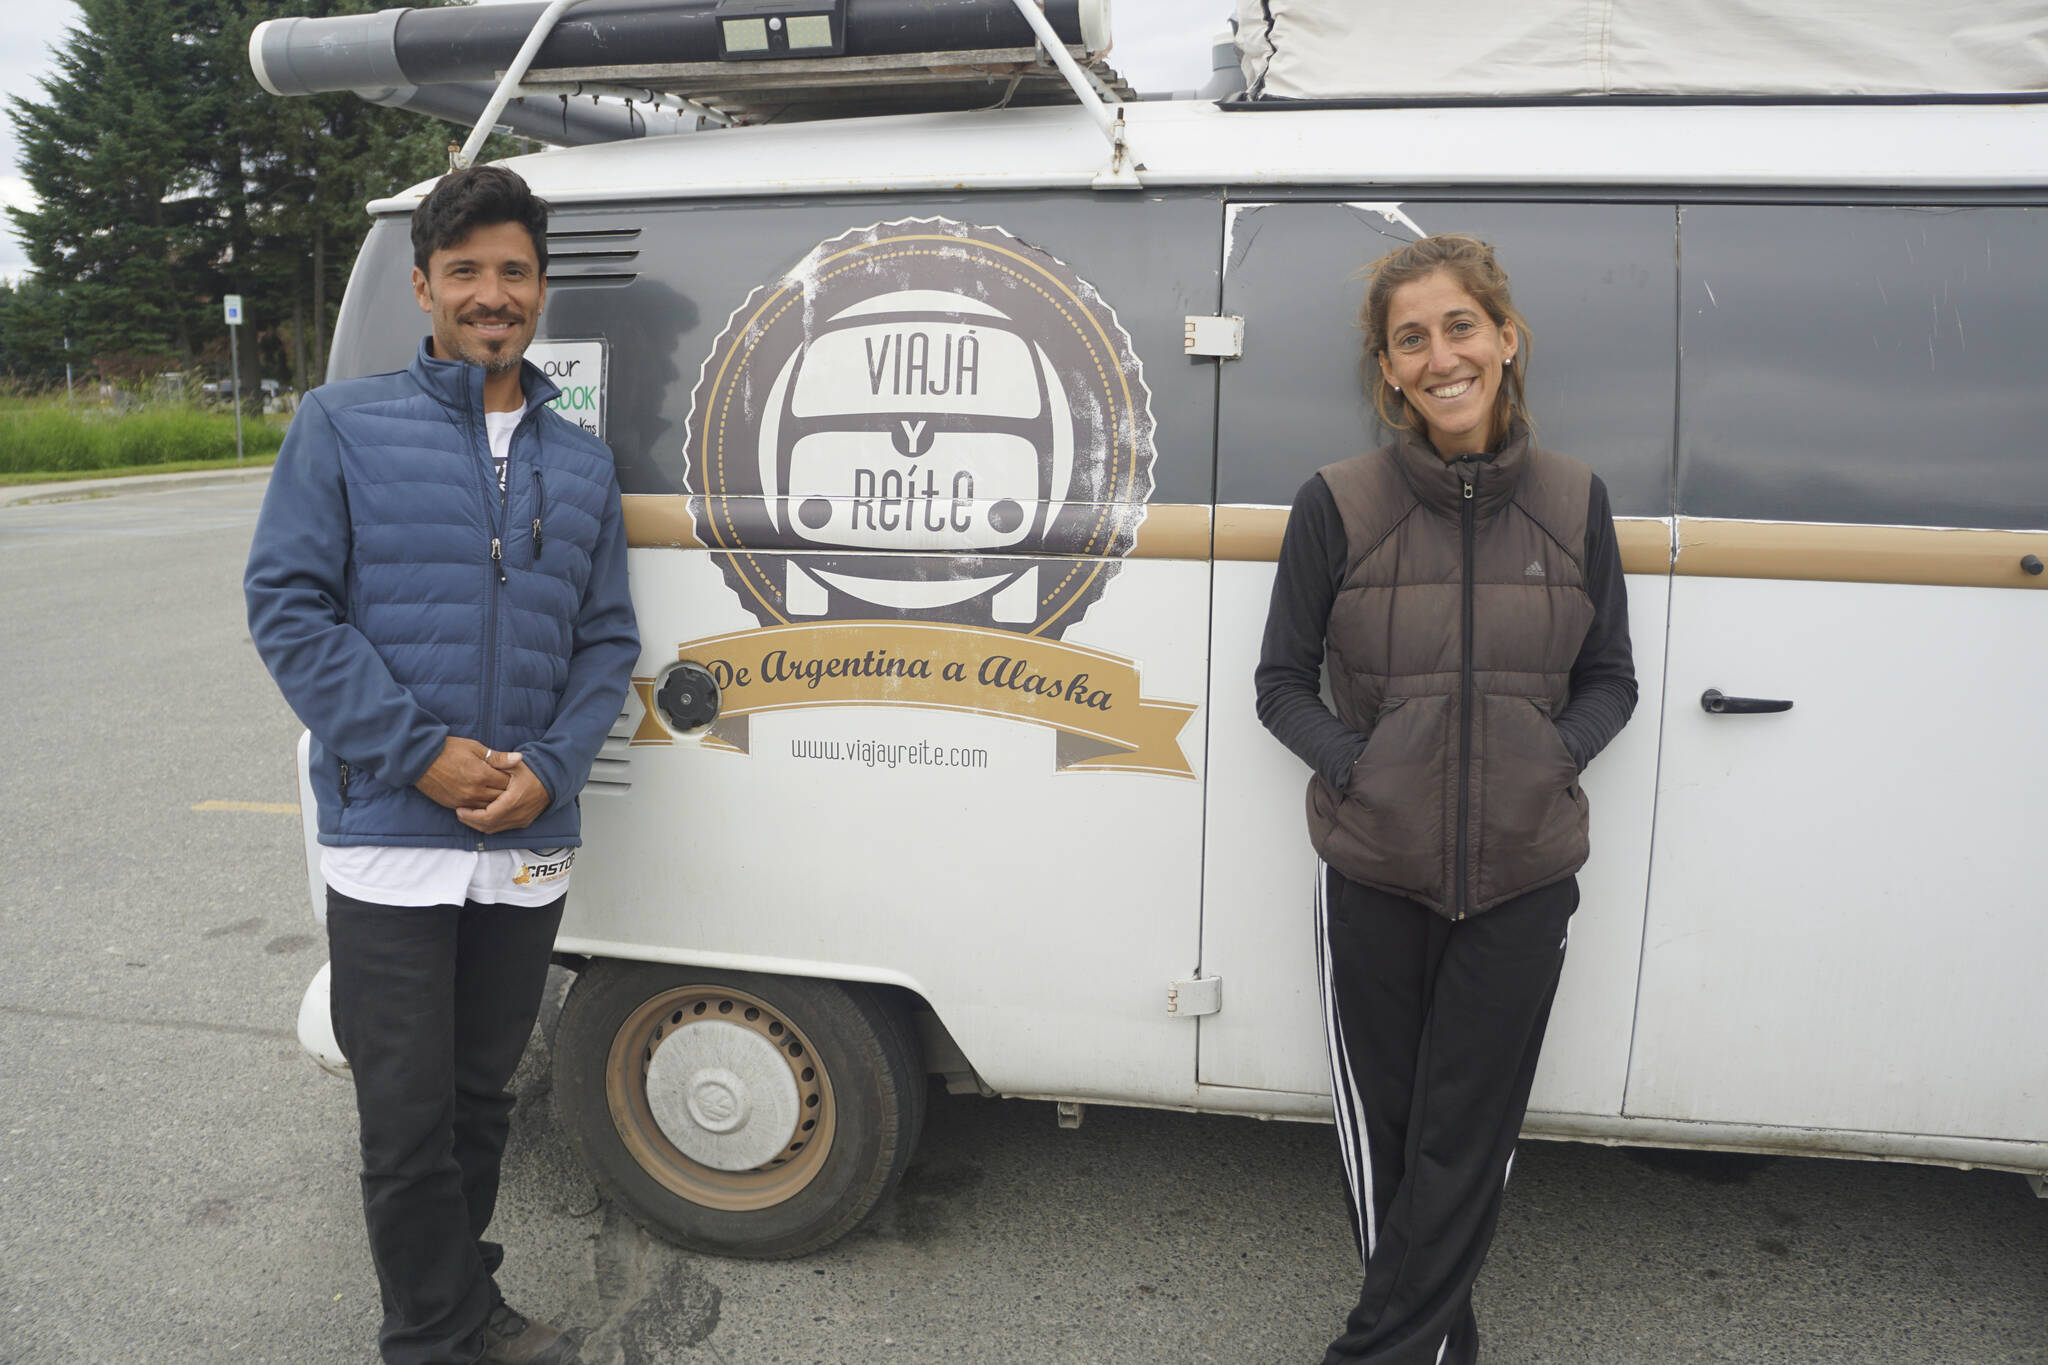 Photo by Michael Armstrong/Homer News Louis Garnero, left, and Maria Bisotto, right, stand next to their 1986 Volkswagen van on Thursday, July 7, 2022, in the parking lot of the Homer Public Library in Homer, Alaska. From Cordoba, Argentina, starting in 2016 they drove their Type 2 VW Kombi all the way from Argentina to Alaska, about 70,000 miles. Garnero and Bisotto arrived in Homer at the End of the Road on Wednesday, July 6. They stayed in Mexico for 18 months during the COVID-19 pandemic. They have written about their adventures in a book in Spanish, “LiberArte: Historia de viaje y algo mas,” with illustrations by Garnero. “Viaja y reite” means “travel and laugh” in Spanish. The couple converted the van to a camper themselves. Although VW quit exporting the T2 to United States in 1979, it continued to make the T2 microbus in Brazil until 2013. For more on their adventures, visit https://viajayreite.com/liberarte-historias-de-viaje-y-algo-mas. https://viajayreite.com/liberarte-historias-de-viaje-y-algo-mas/